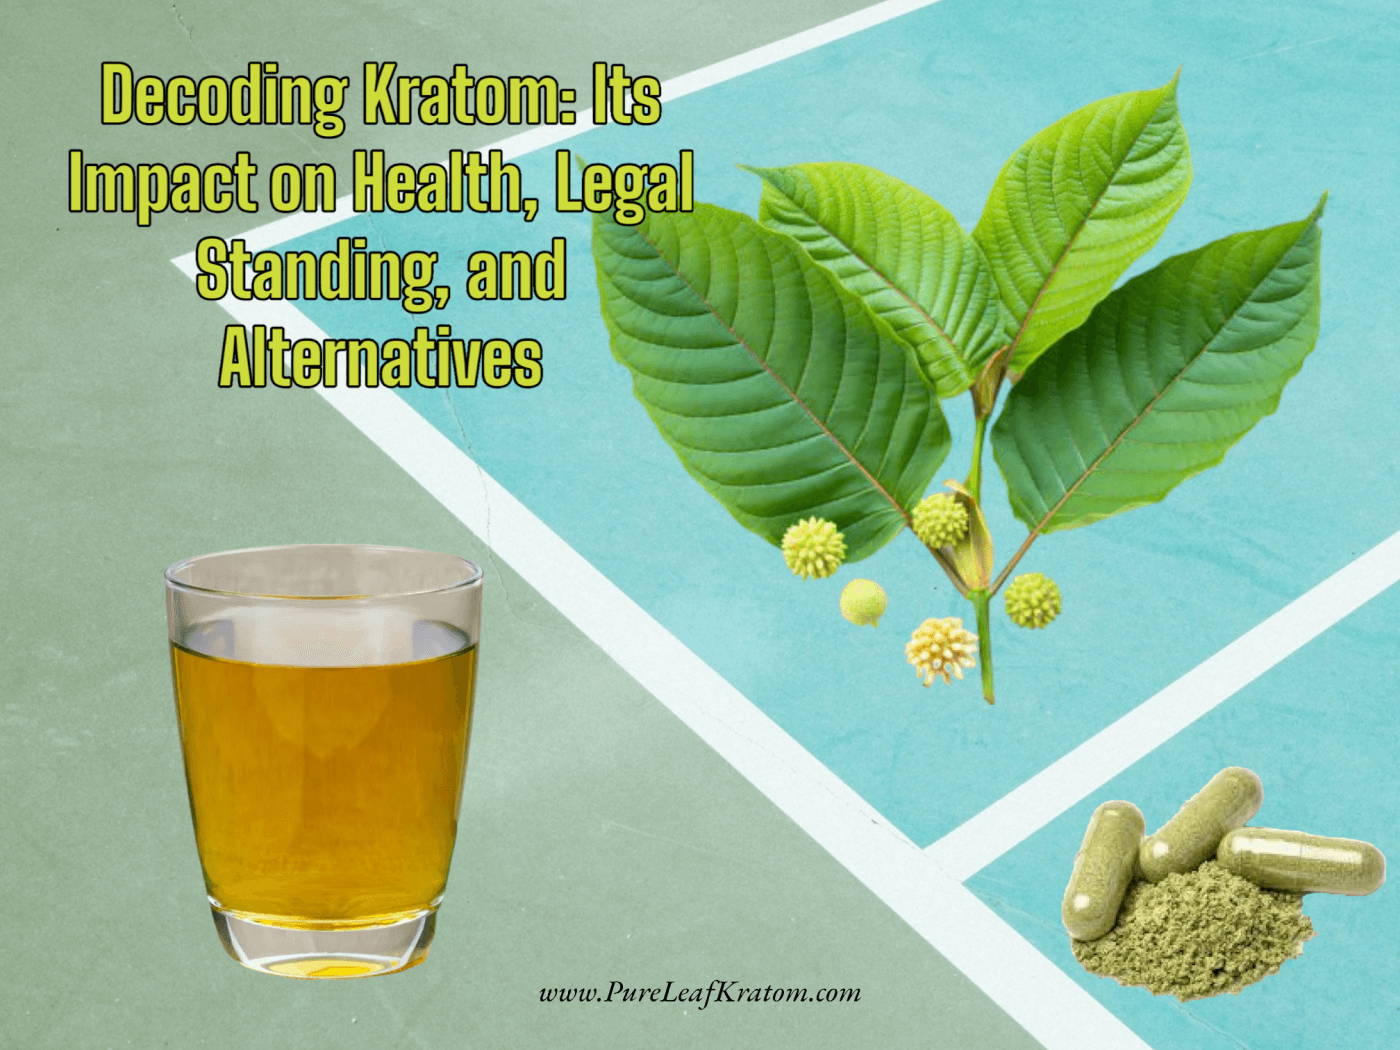 Decoding Kratom: Its Impact on Health, Legal Standing, and Alternatives